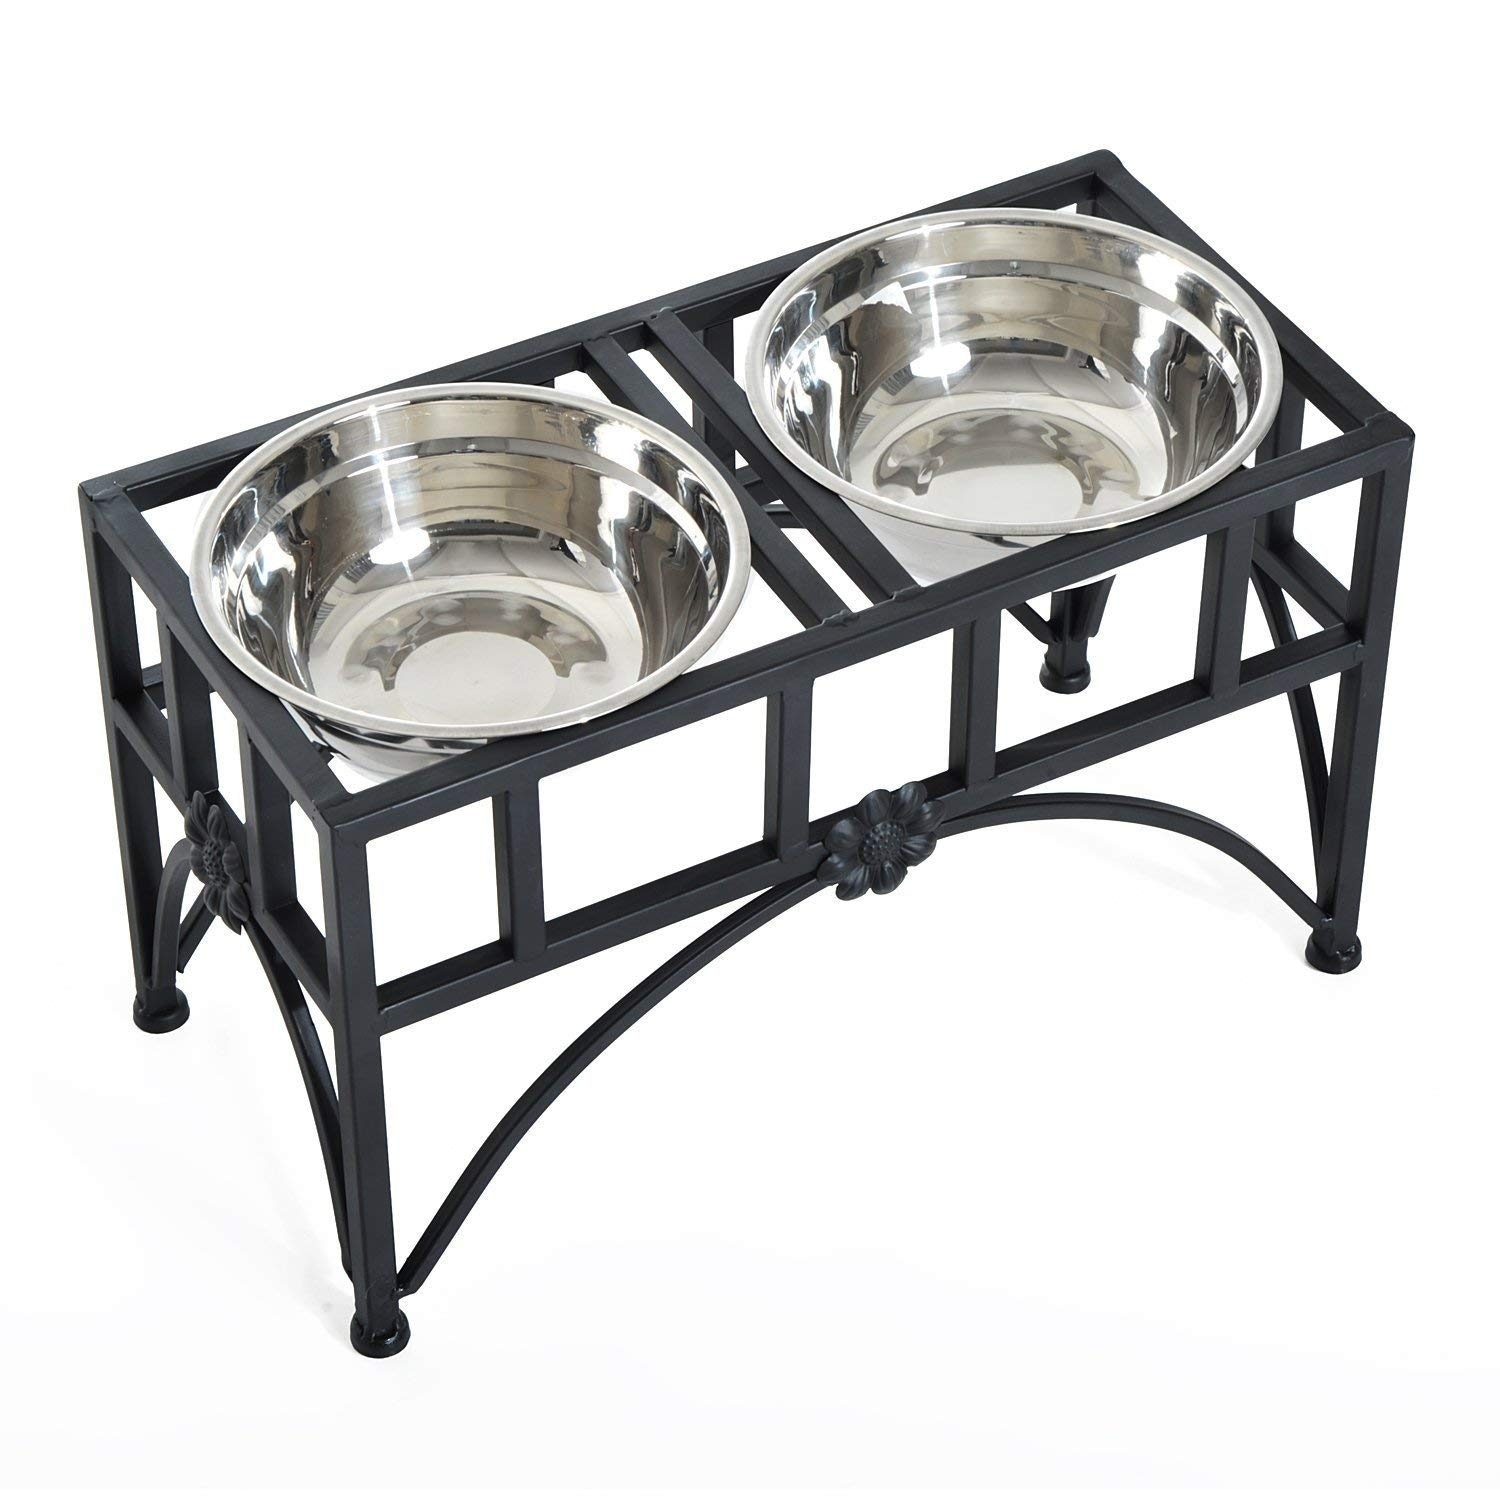 PawHut Double Stainless Steel Heavy Duty Dog Food Bowl Elevated Pet Feeding  Station 17 inches